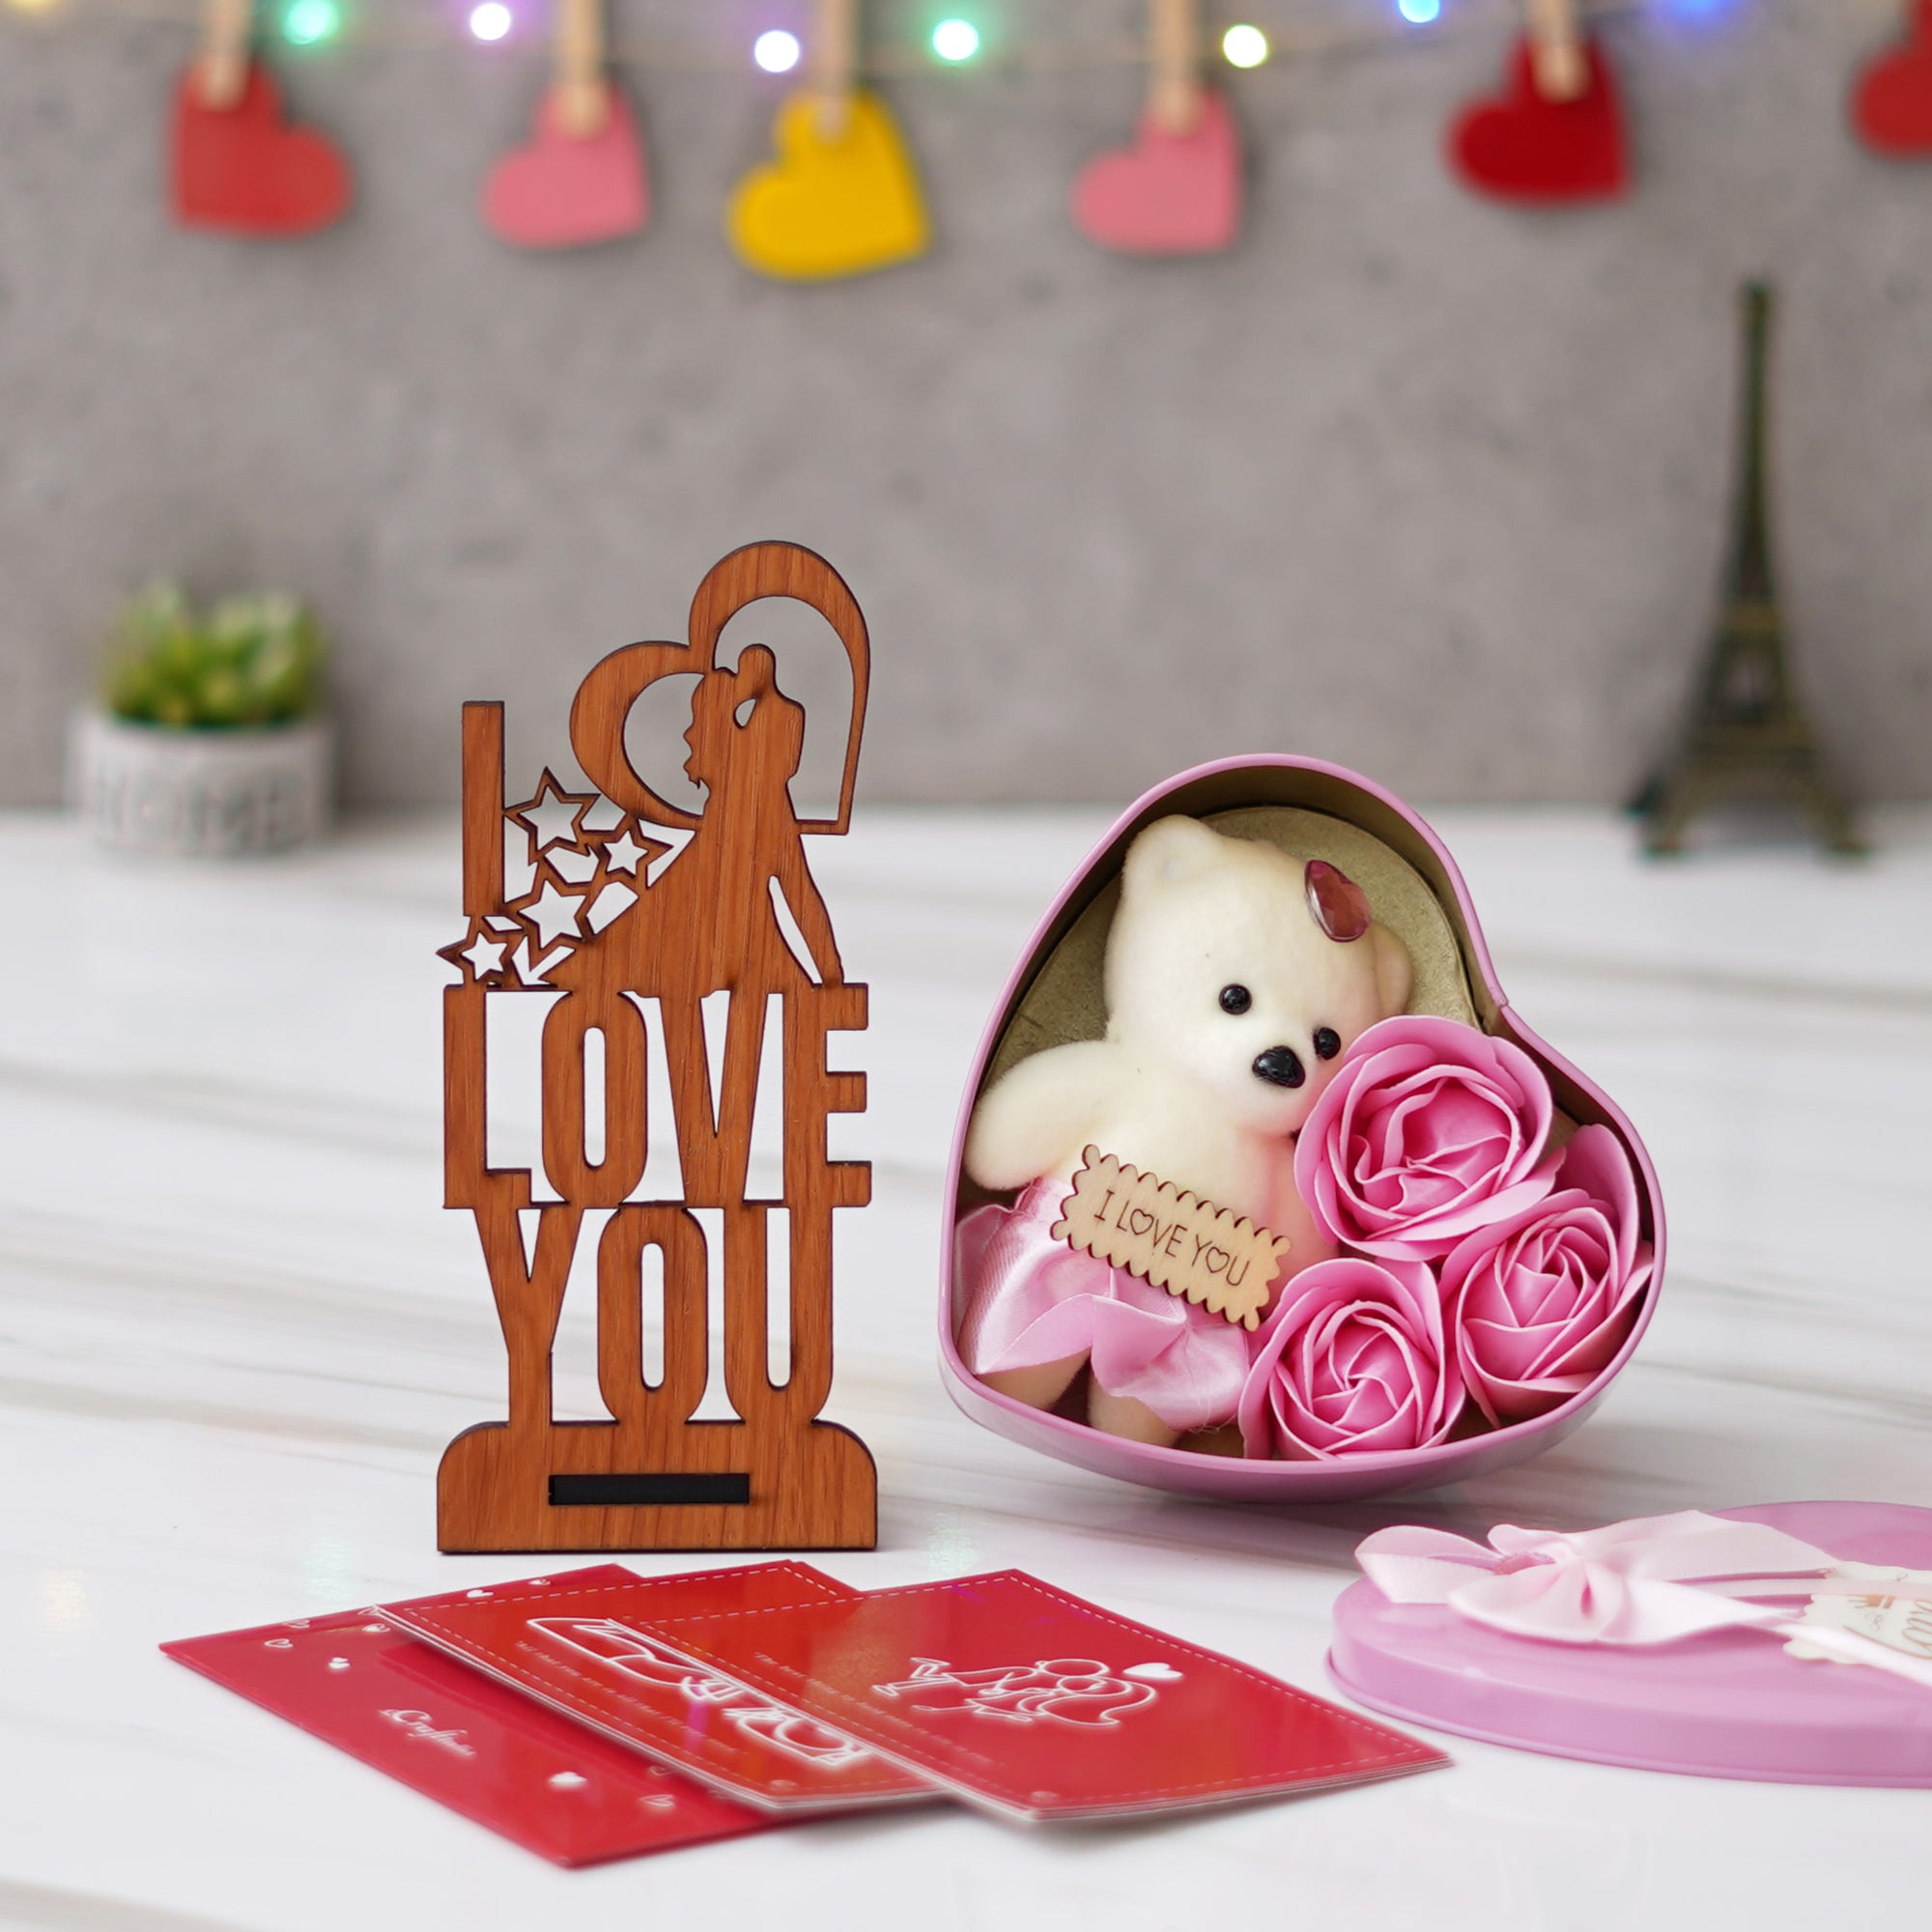 Valentine Combo of Pack of 8 Love Gift Cards, "Love You" Wooden Showpiece With Stand, Pink Heart Shaped Gift Box with Teddy and Roses